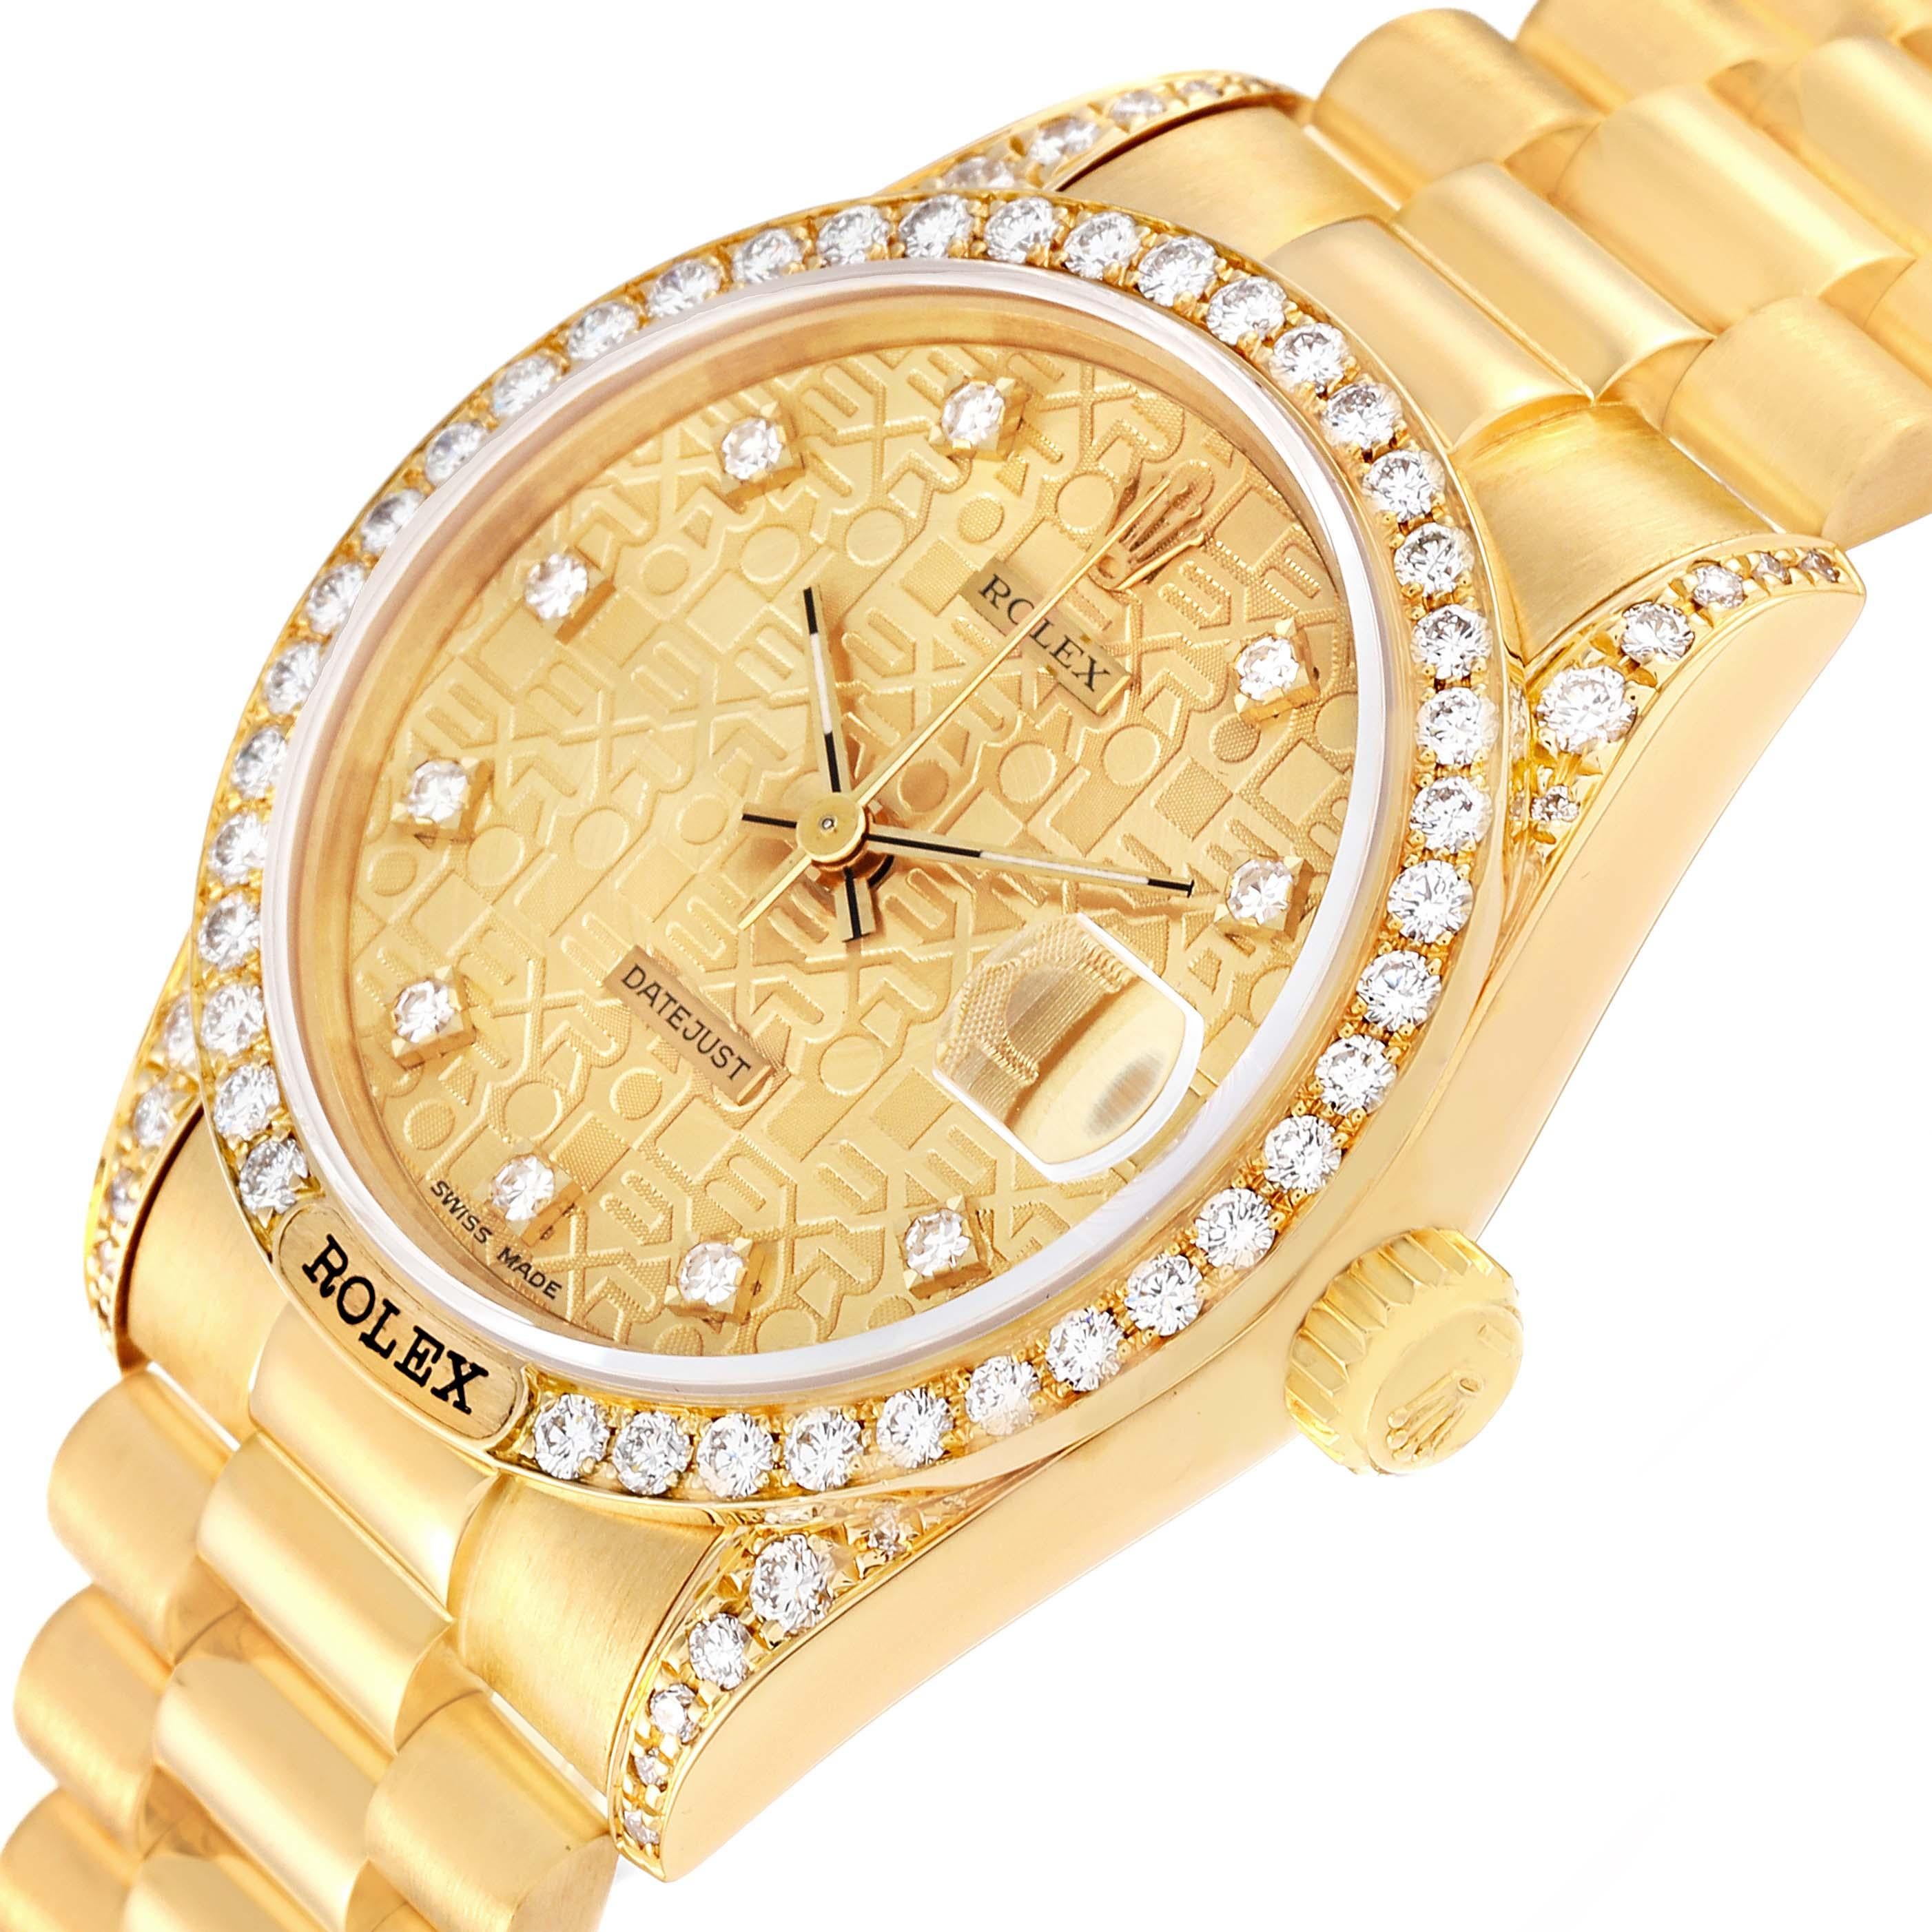 Rolex Datejust President Yellow Gold Anniversary Diamond Dial Ladies Watch 68158 In Excellent Condition For Sale In Atlanta, GA